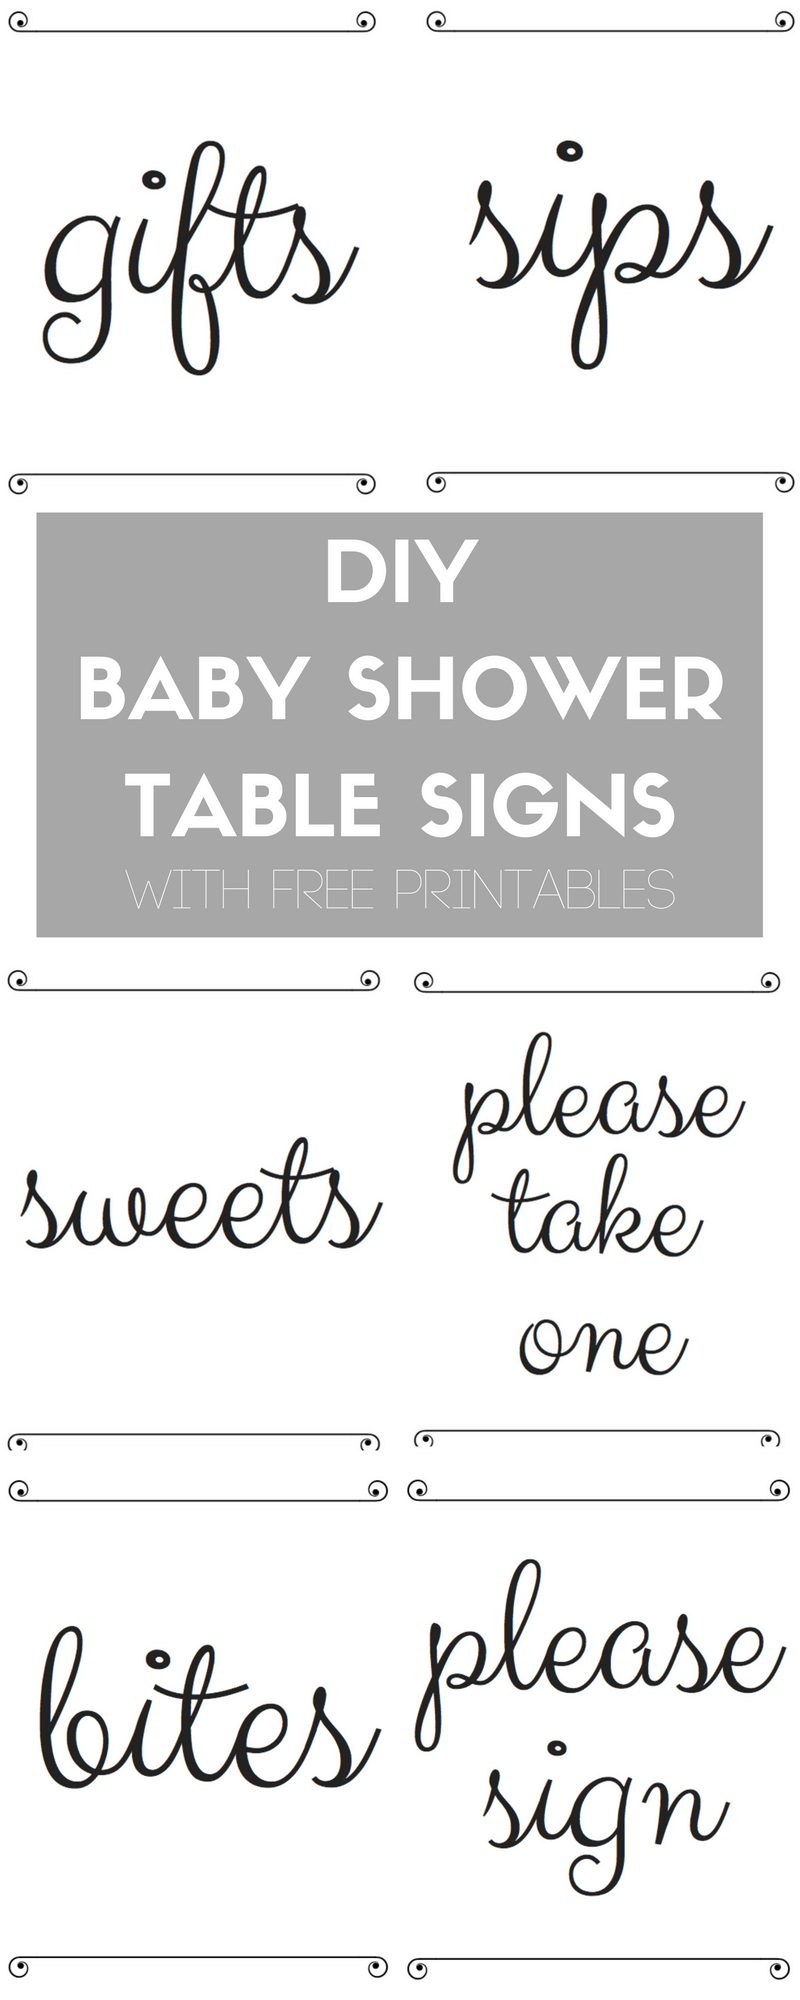 Diy Baby Shower Table Signs With Free Printables - Free Printable Baby Shower Table Signs